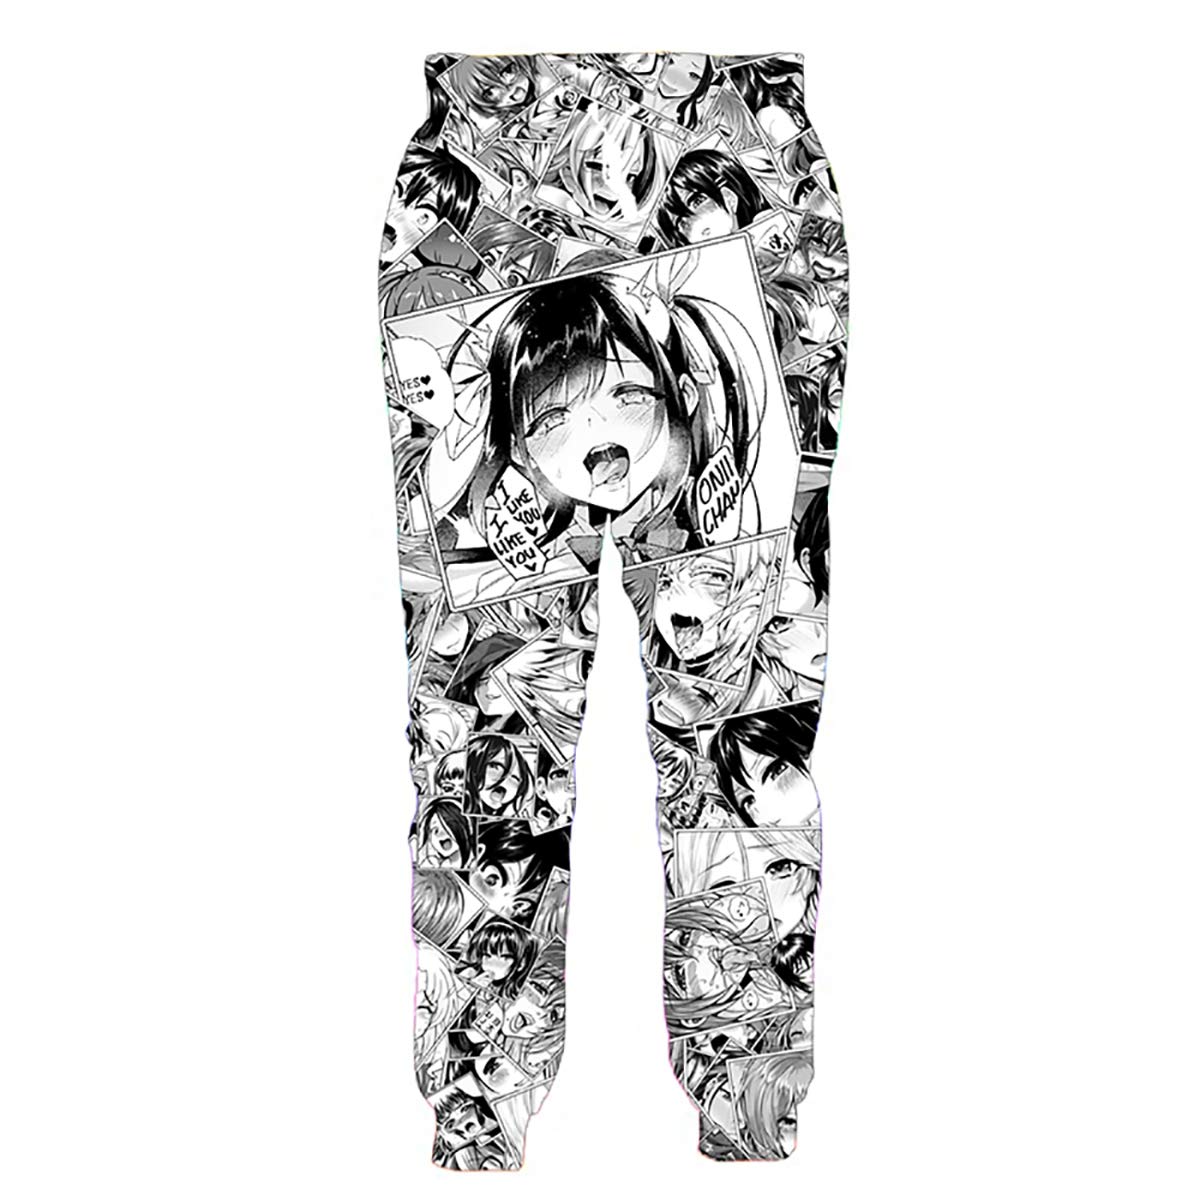 Anime Girls Printed Animecore Pants - Aesthetic Clothes Shop